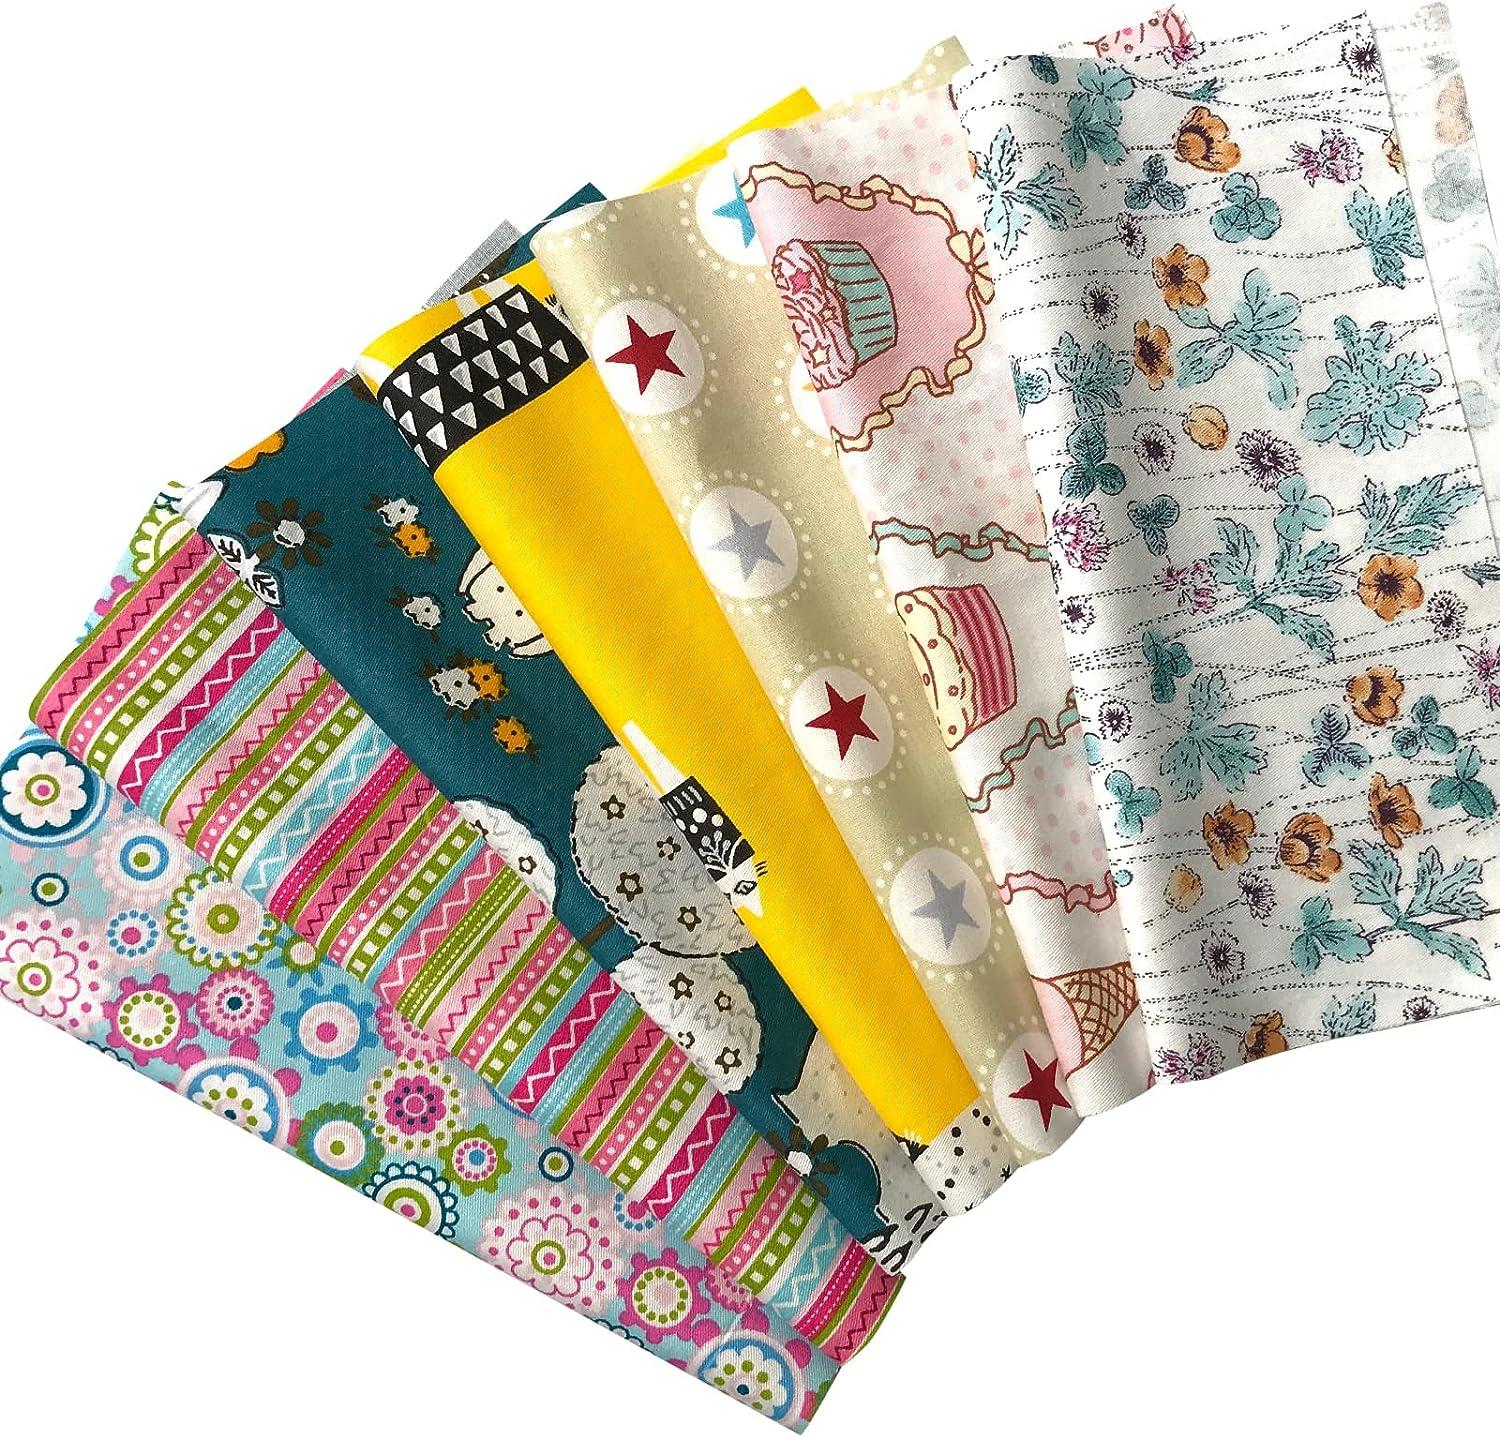 7pcs 20x20 Cotton Fabric Fat Quarters, Large Pattern Patchwork Fabric  Craft Printed Cotton Material Mixed Squares Bundle Quilting Scrapbooking